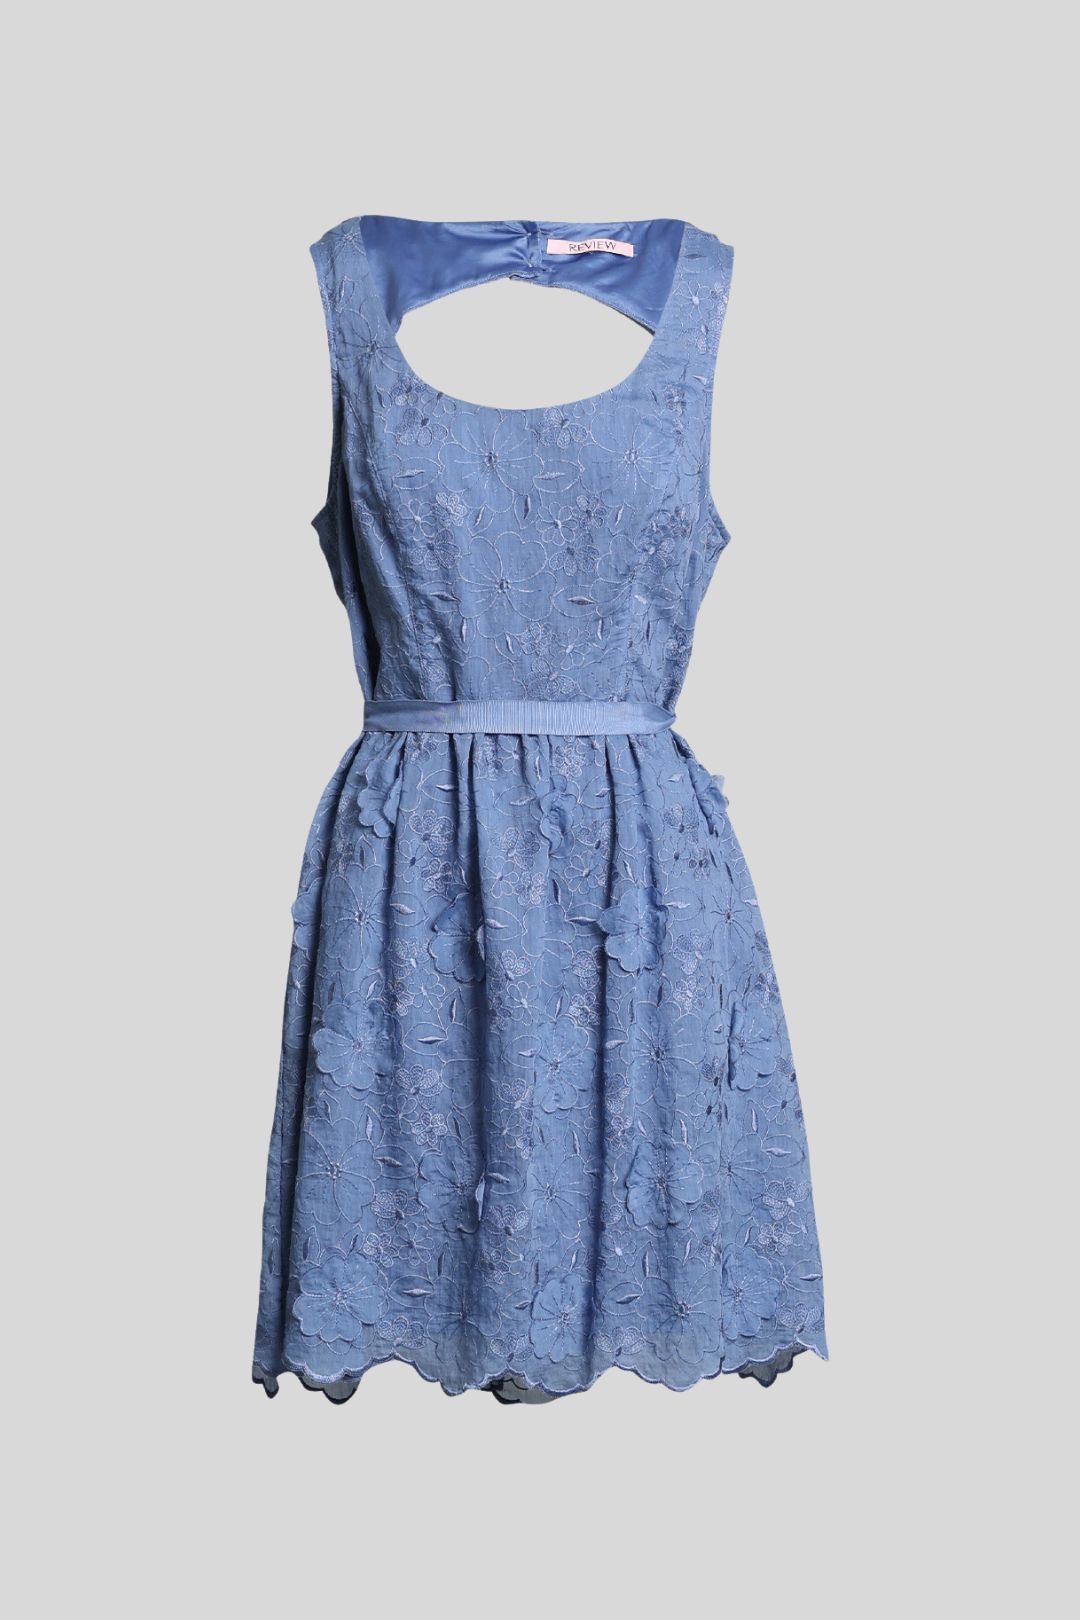 Blue Sleeveless Floral Embroidered Dress